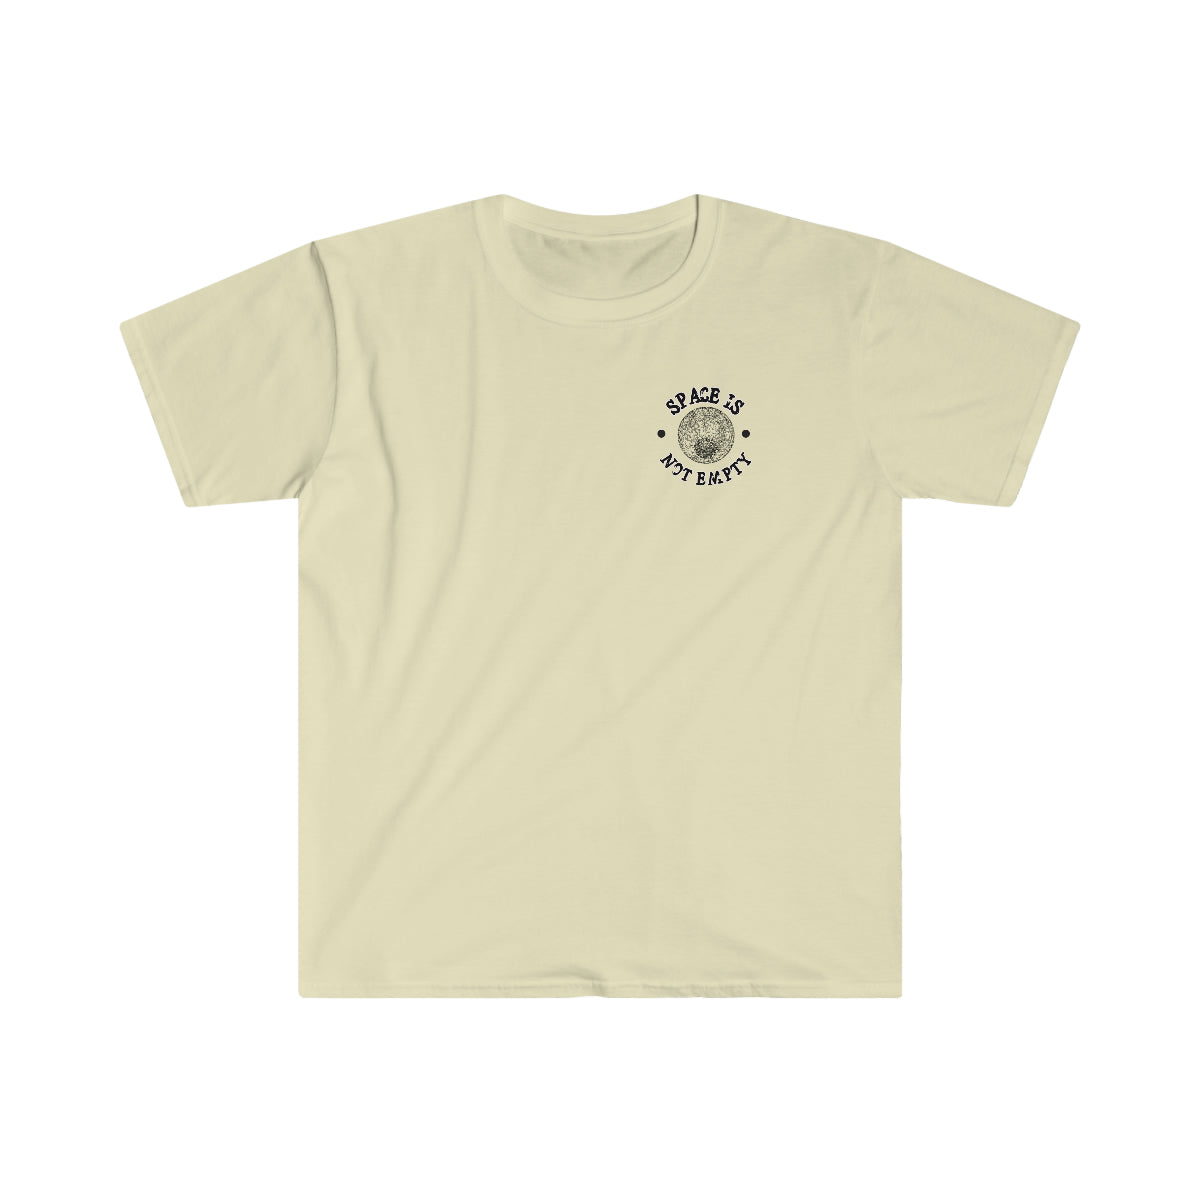 A white t-shirt with the Apollo Docking T-Shirt logo, perfect for any space enthusiast.